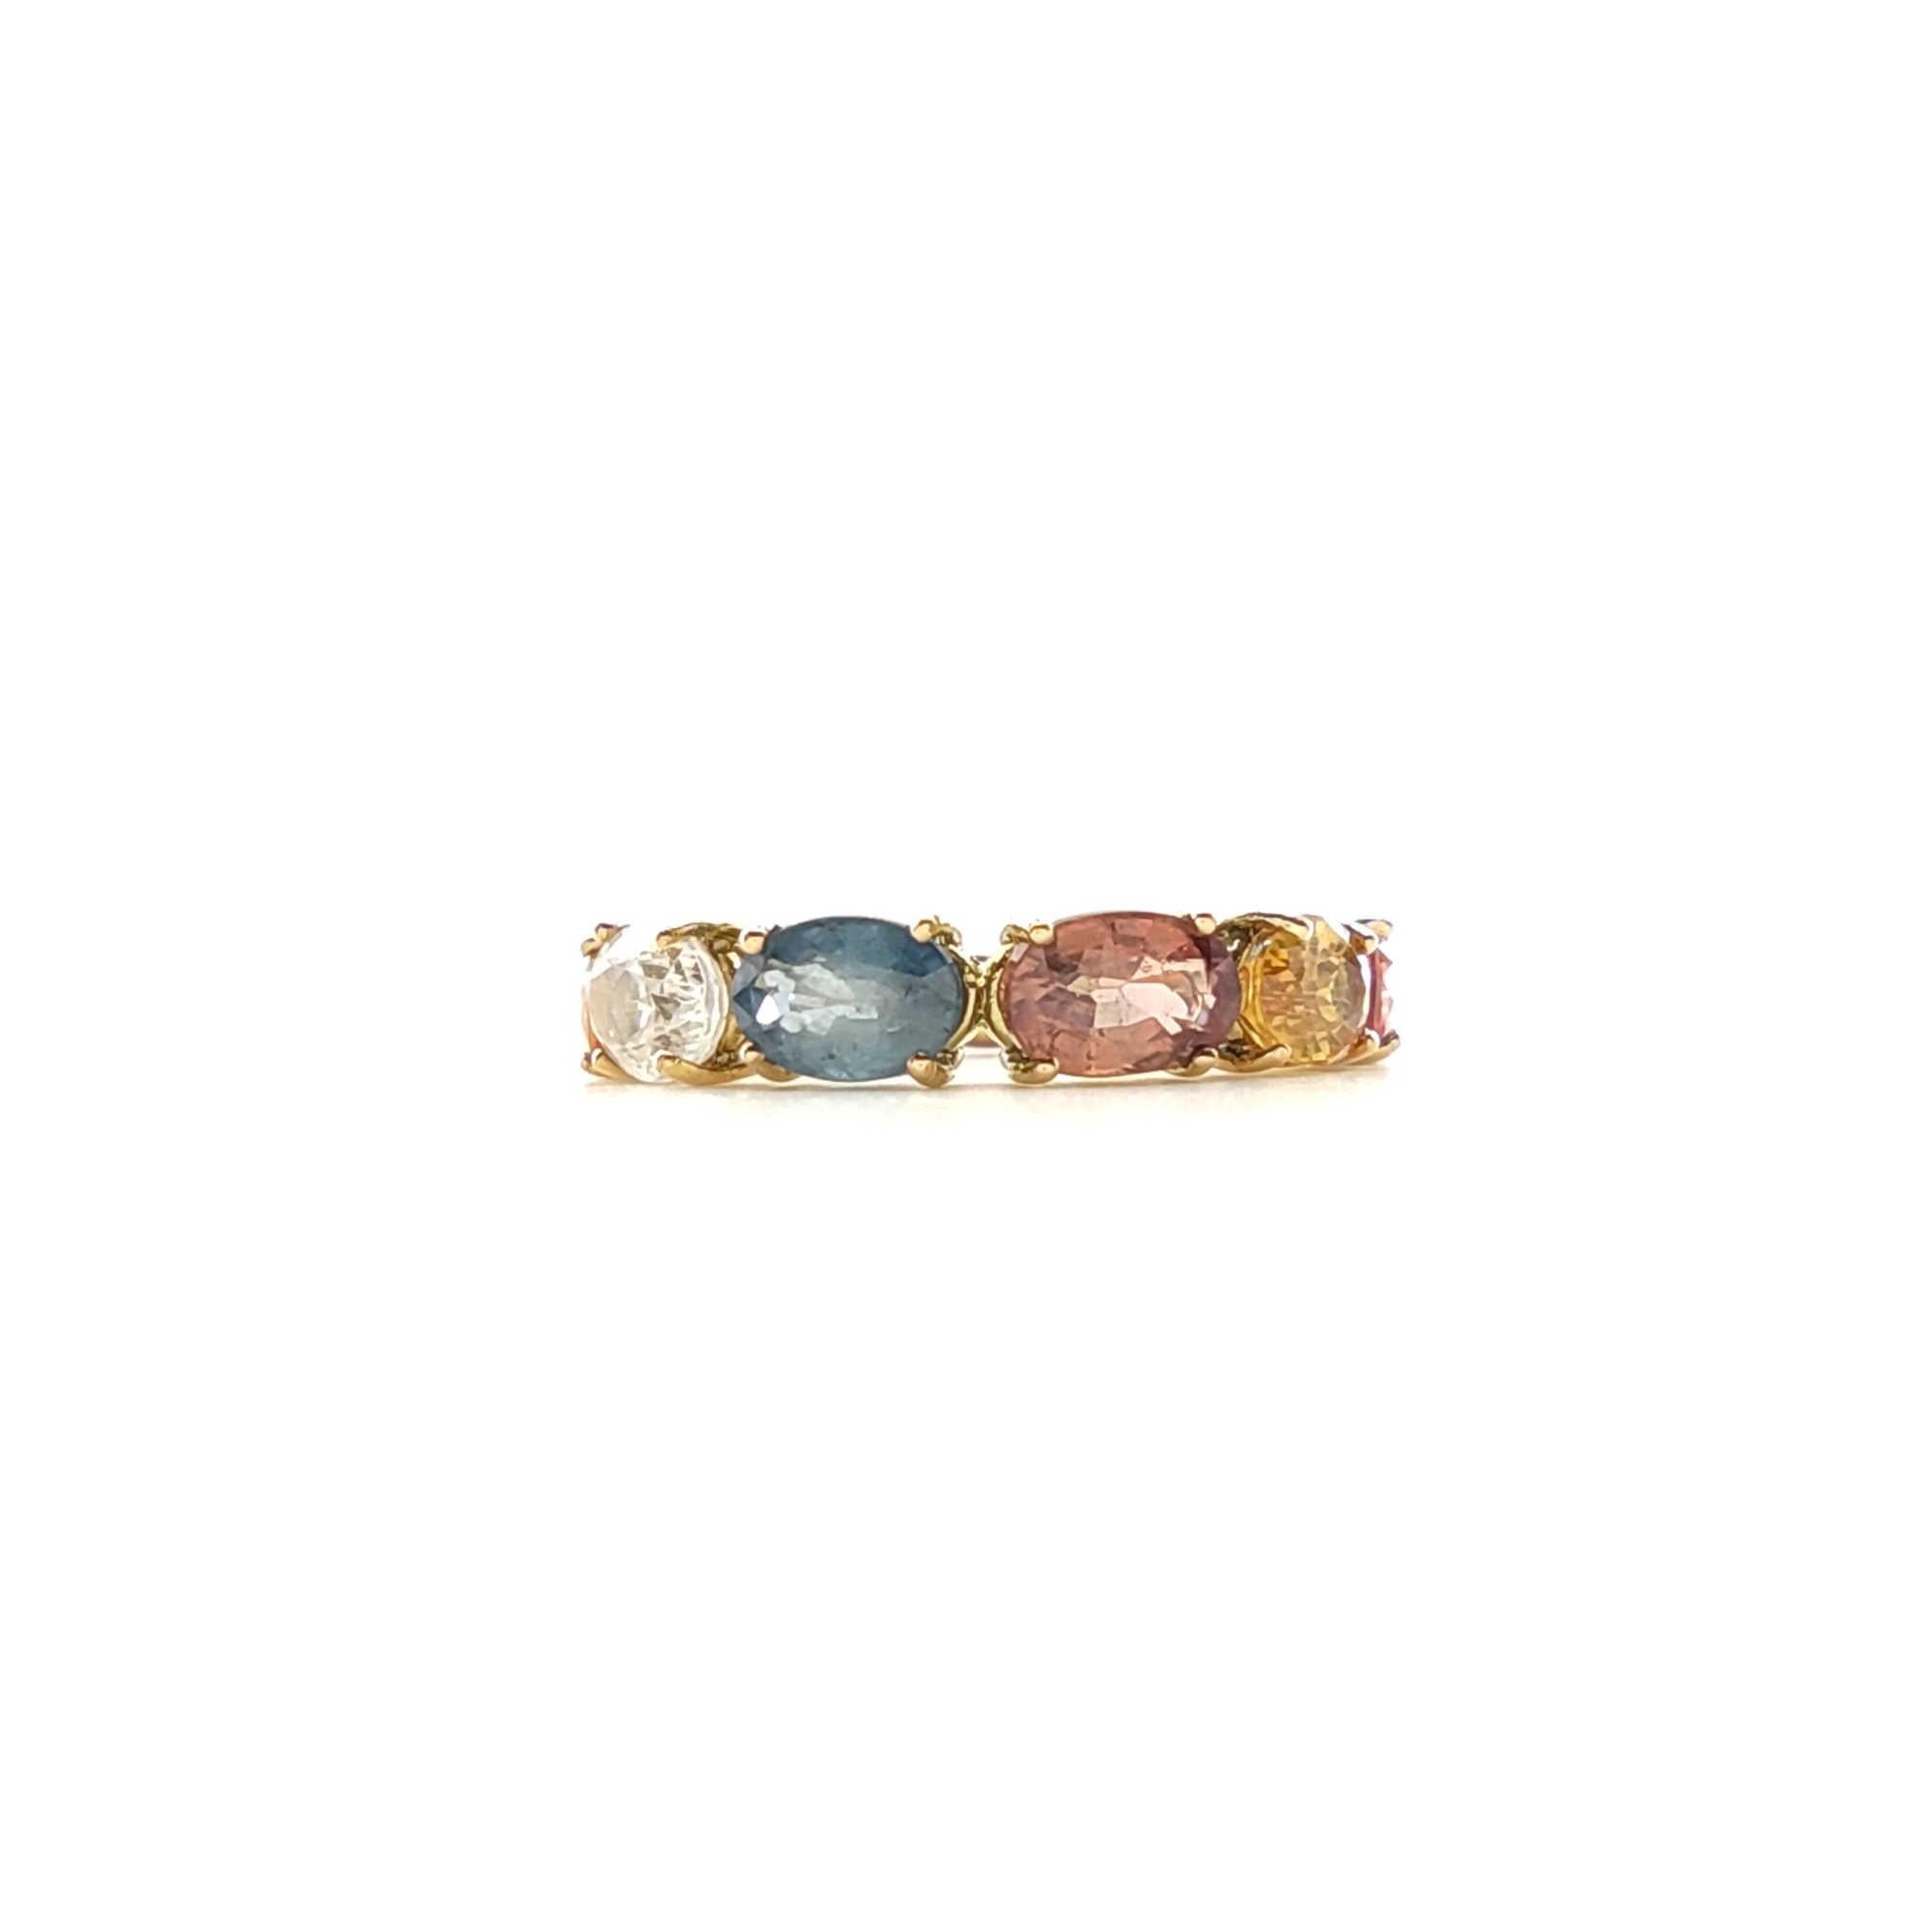 Oval Cut Unique 14kt Yellow Gold Ring with Handcrafted Design & Sapphires - Shop Now For Sale